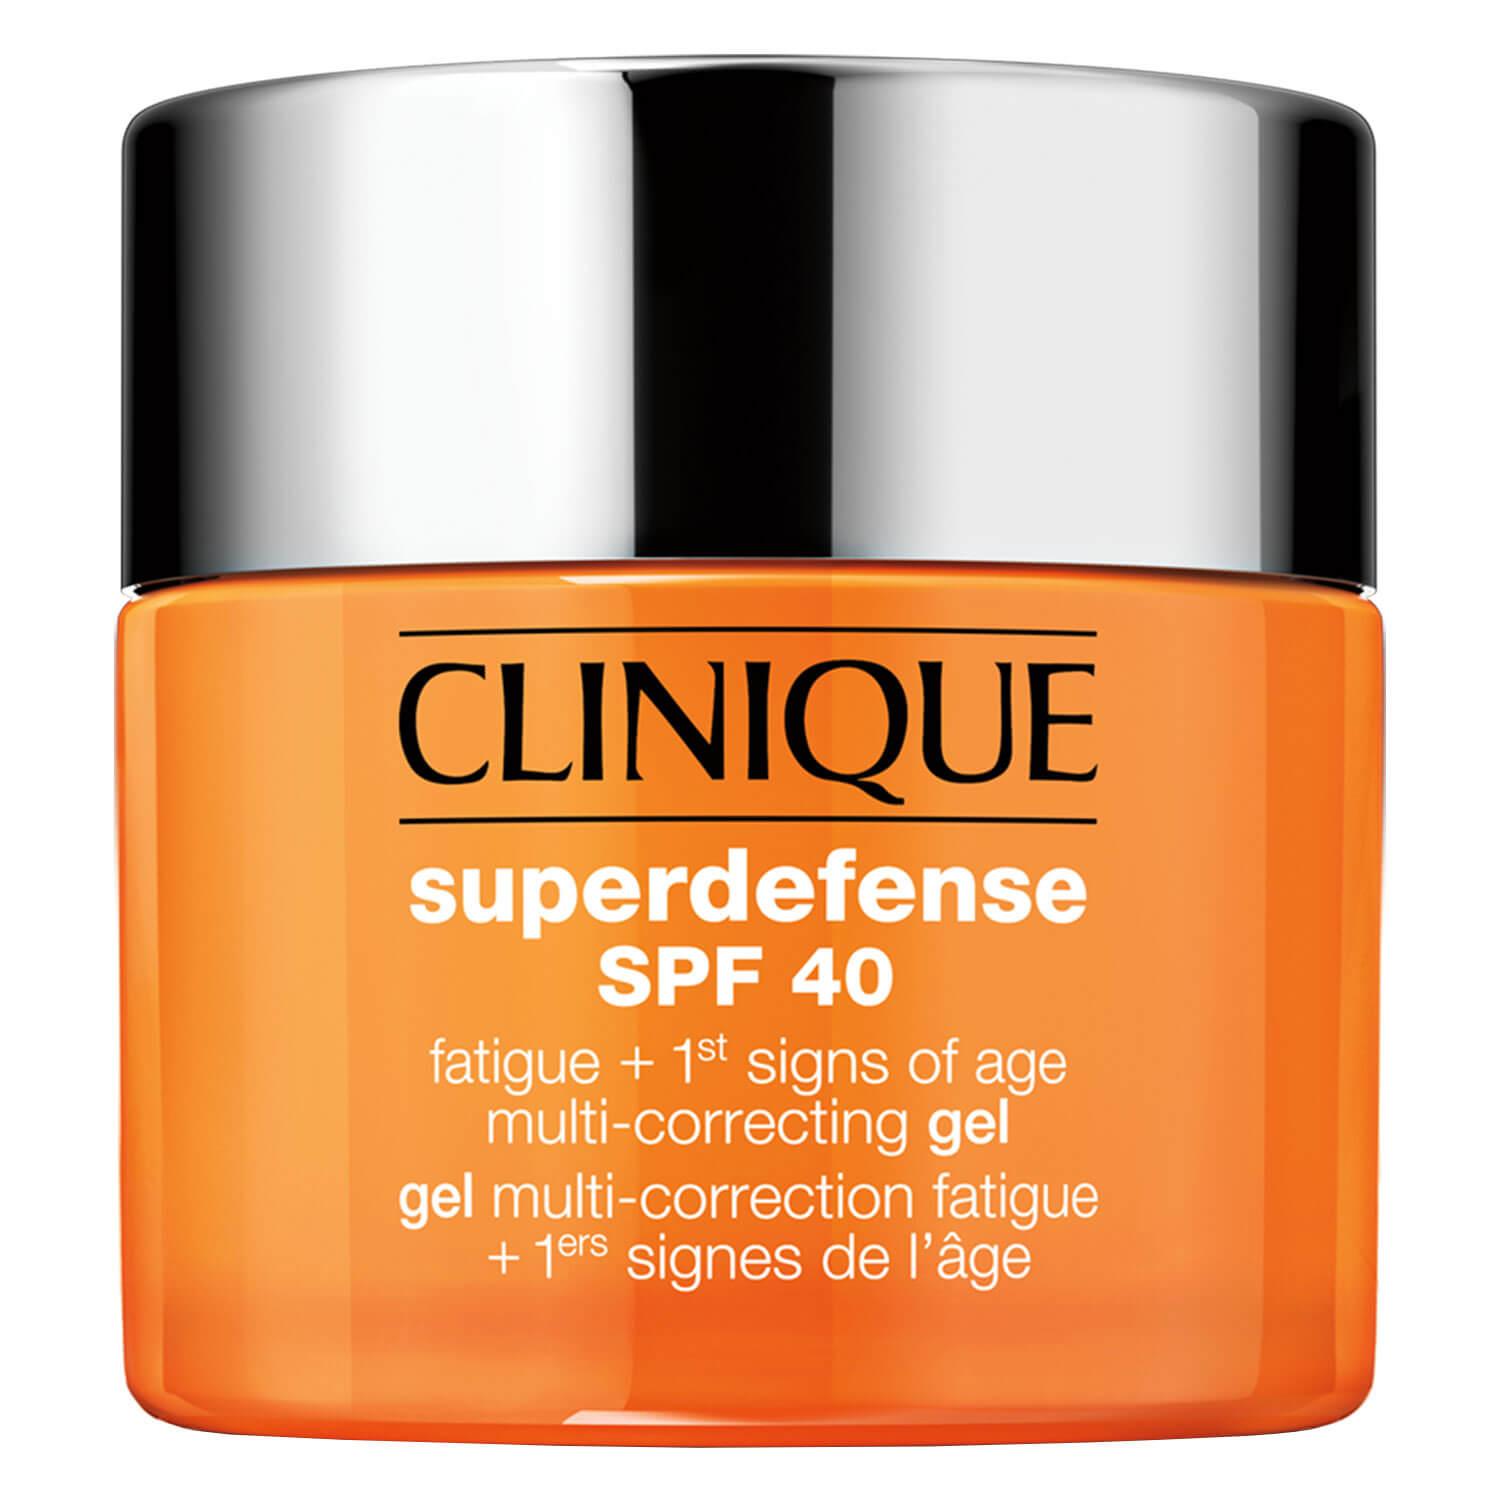 Superdefense - SPF 40 Fatigue + 1st Signs of Age Multi-Correcting Gel